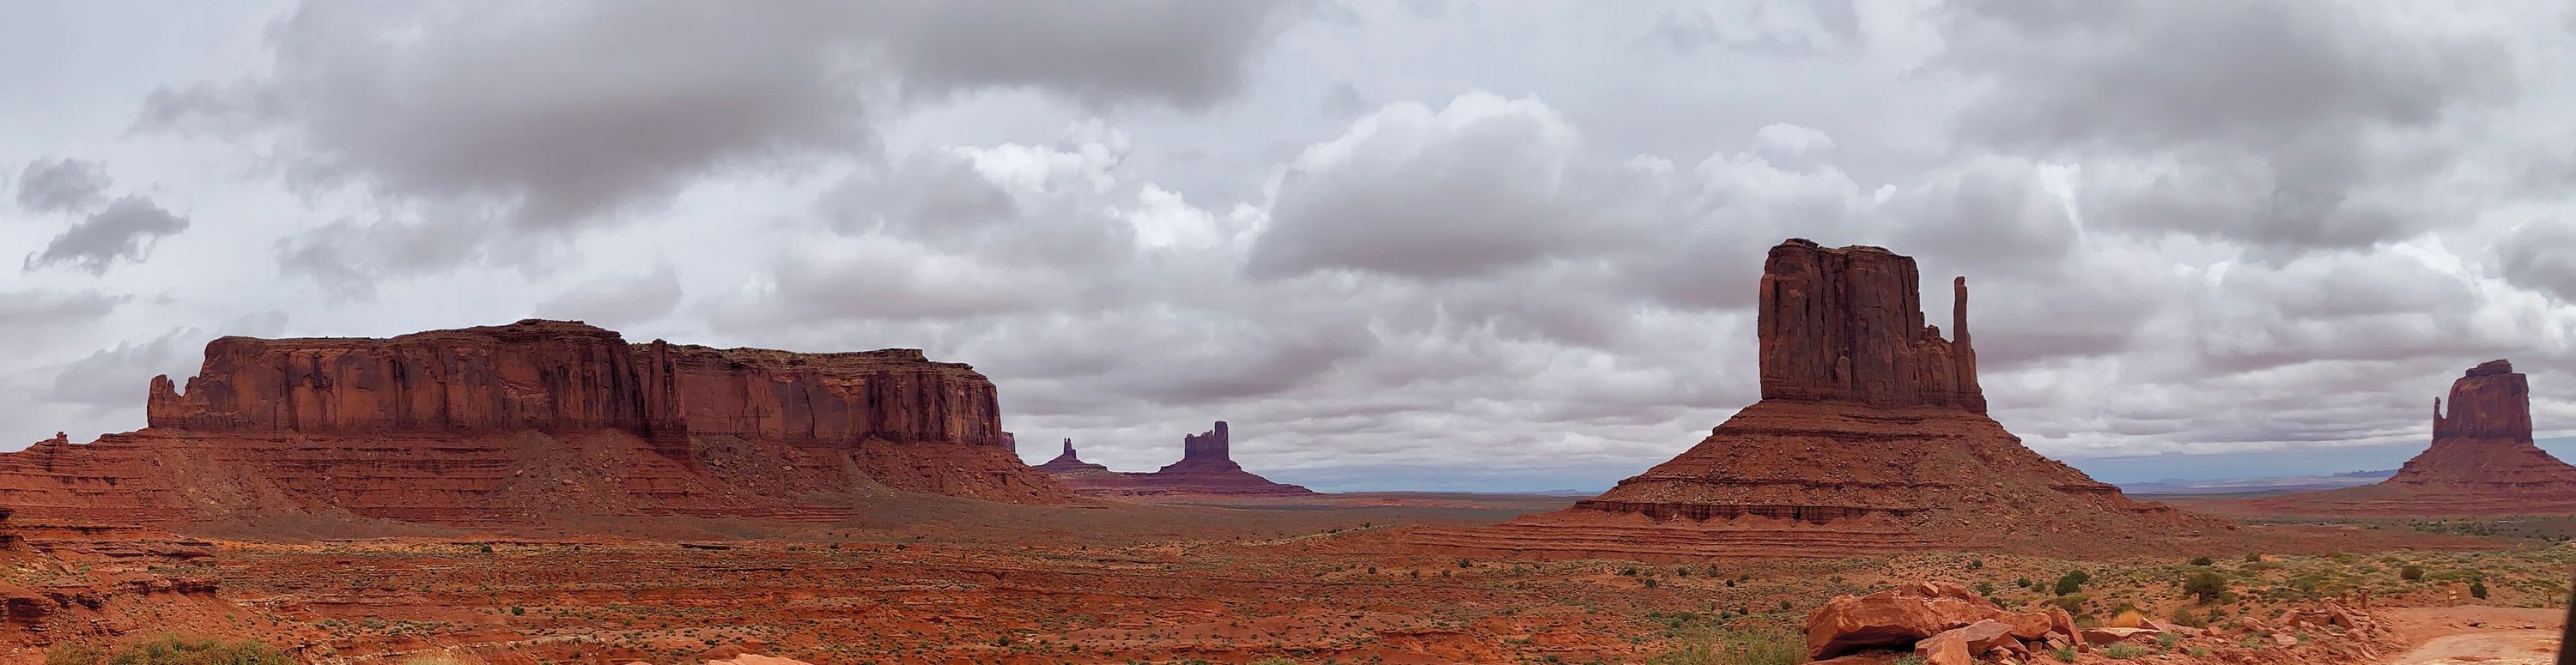 Panoramic view of Monument Valley